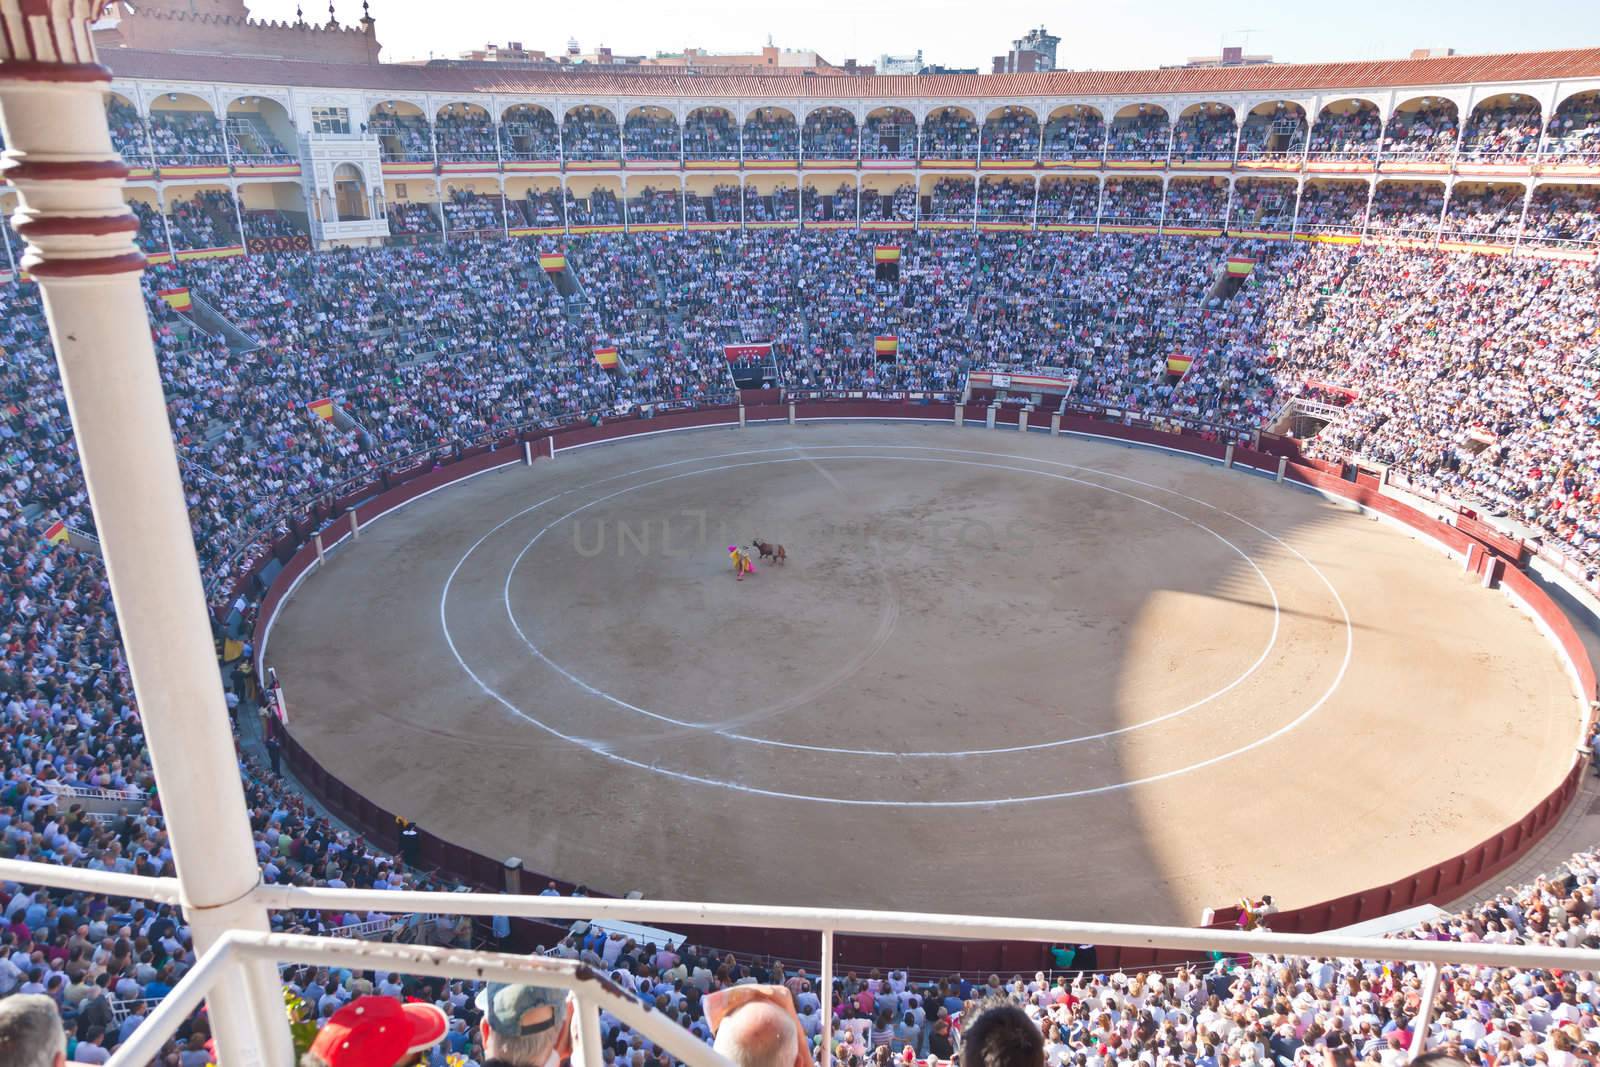 Madrid - OCTOBER 1: The huge crowd jammed in the famous Plaza de Toros are watching the bullfight on OCTOBER 1, 2010 in Madrid. Spain.